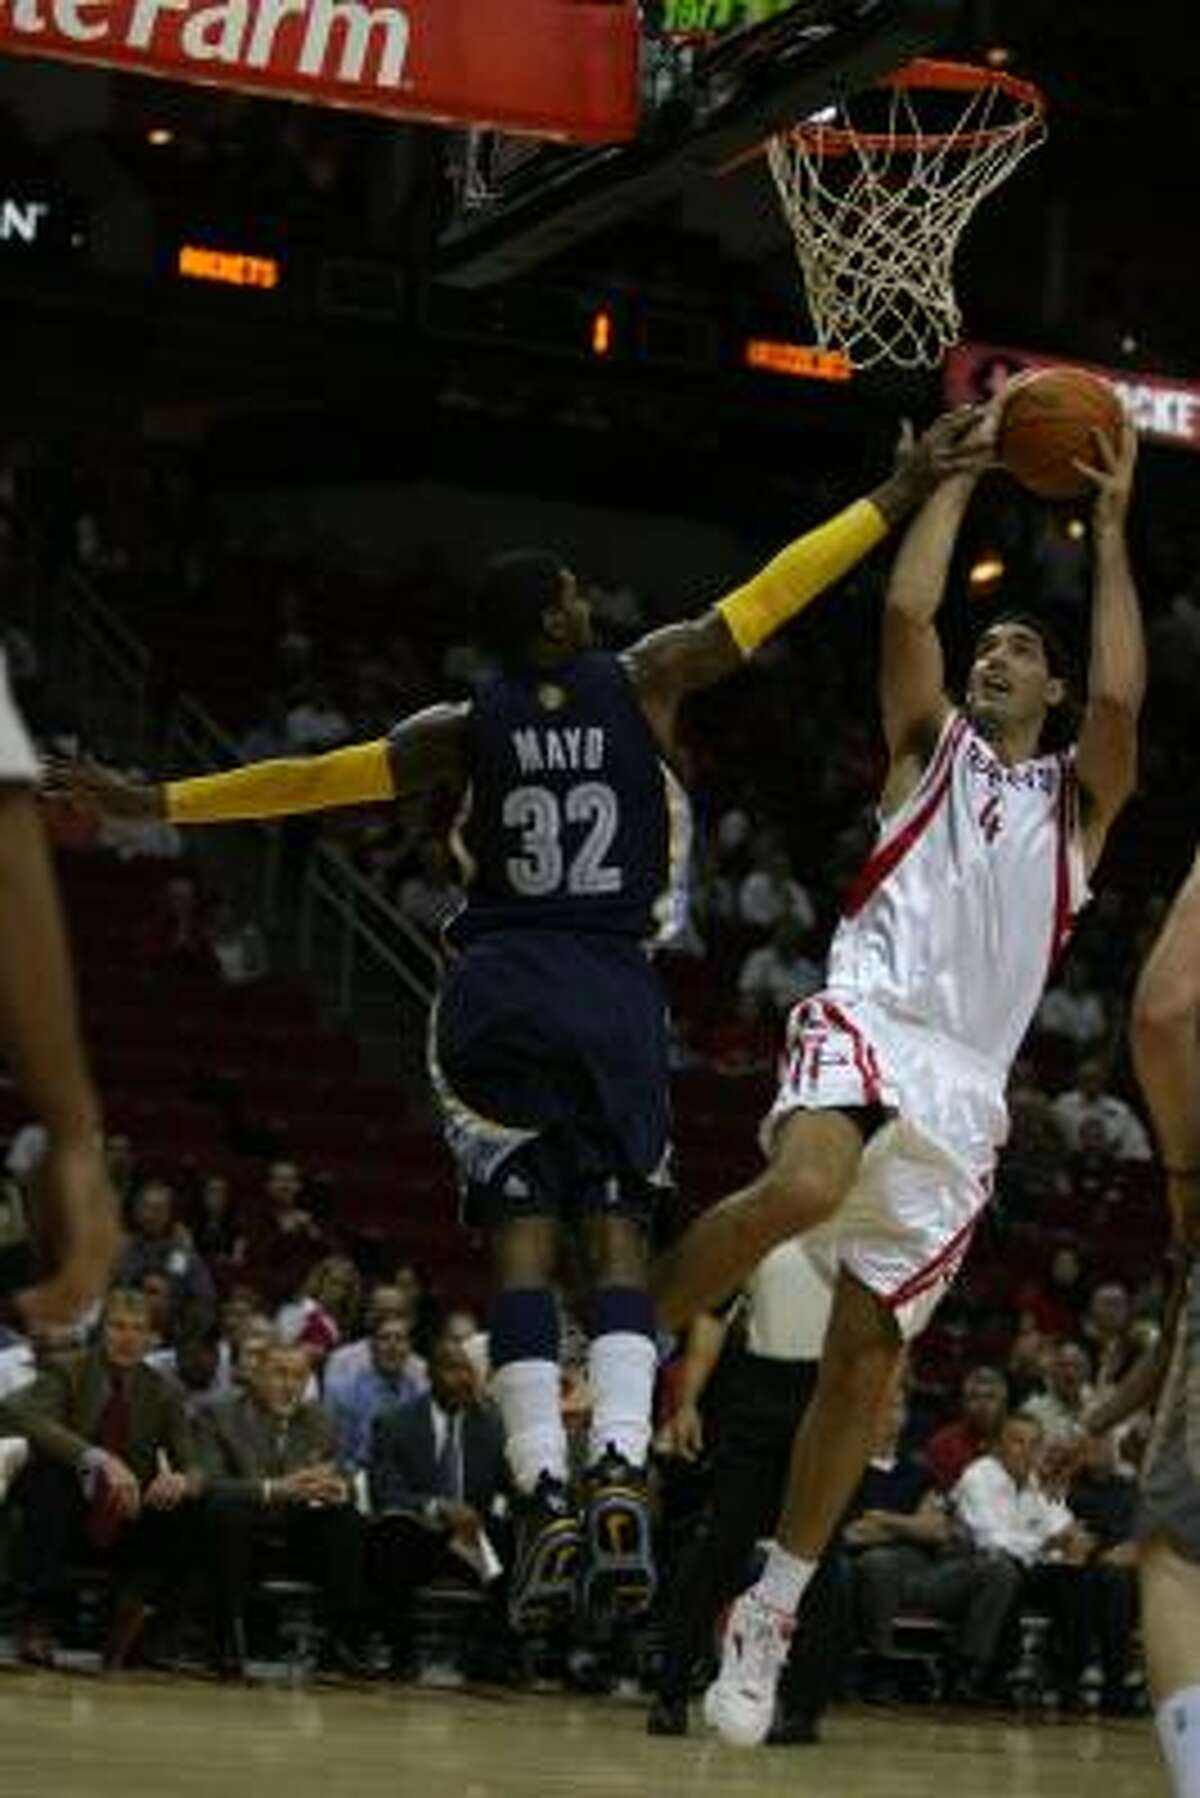 Grizzlies guard O.J. Mayo attempts to defend against Rockets forward Luis Scola out on a fast break to the basket during the first half.